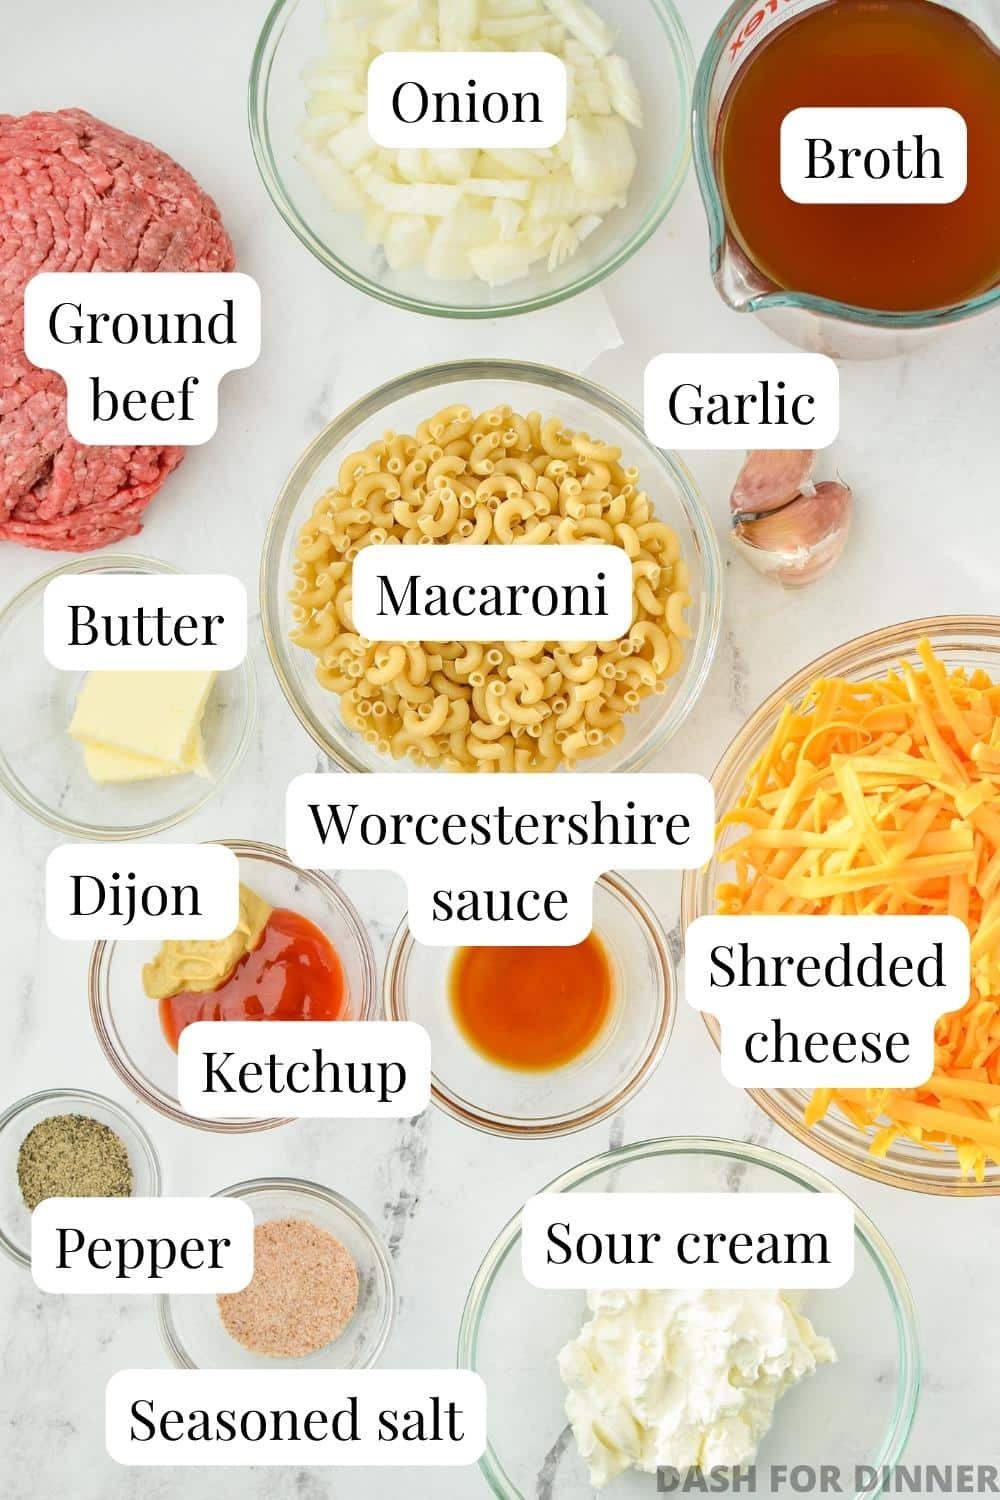 The ingredients needed to make homemade cheeseburger macaroni, including pasta, ground beef, cheese, and broth.